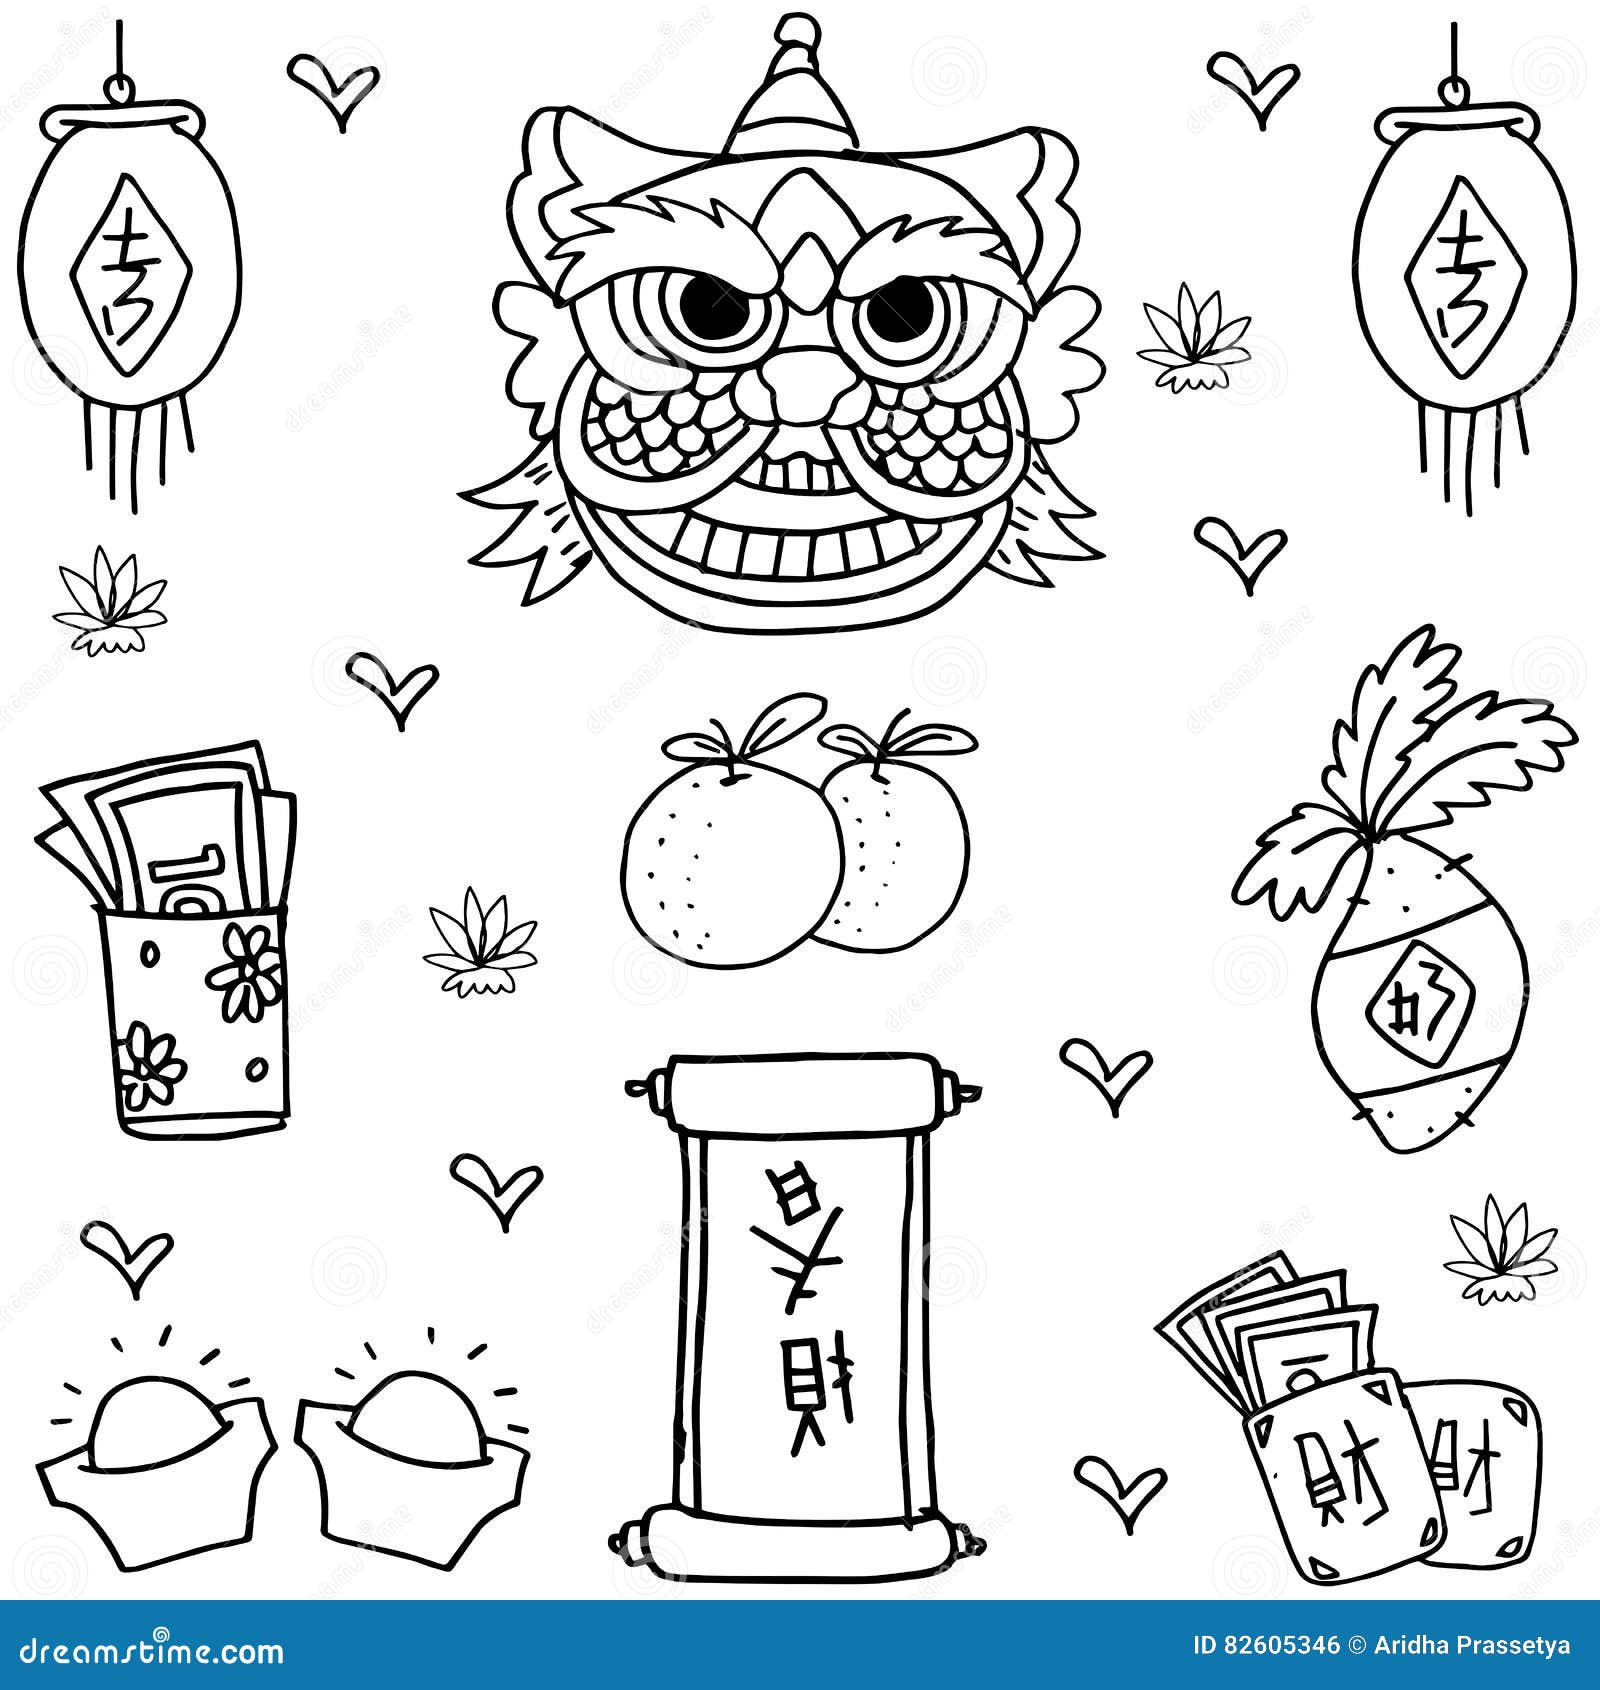 Chinese New Year Red Envelope Doodle Stock Clipart, Royalty-Free